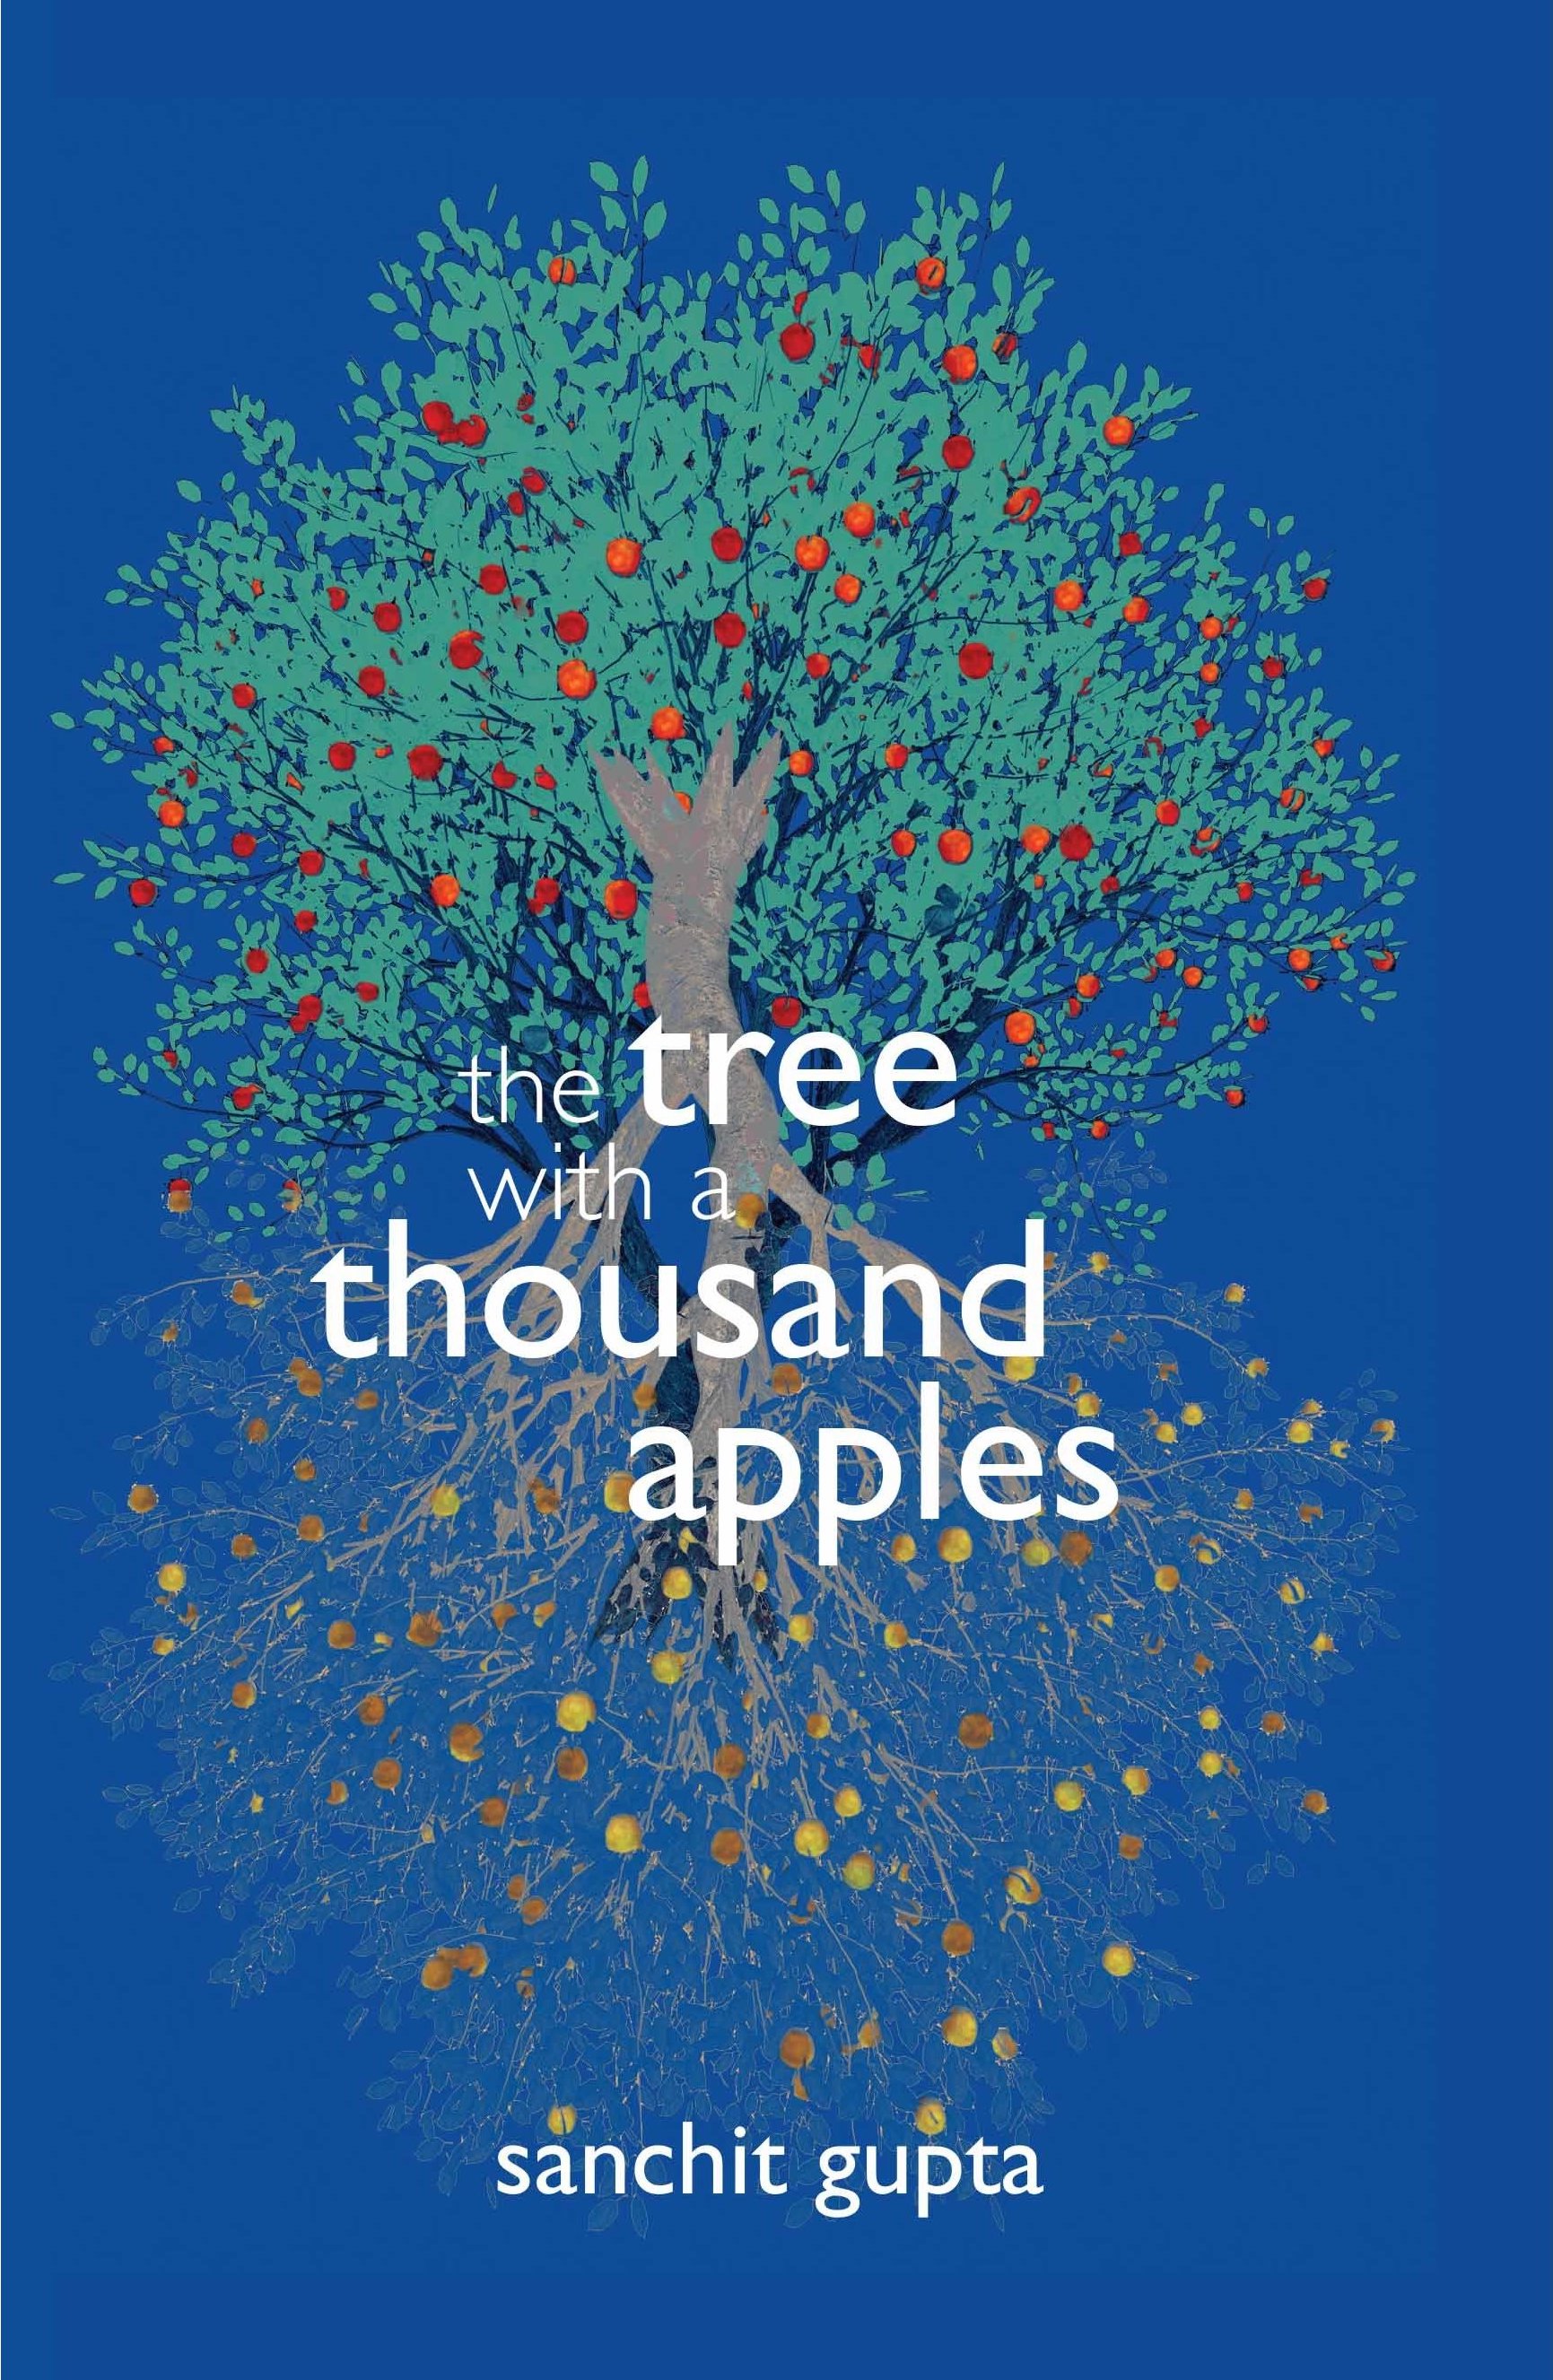 The Tree with a Thousand Apples- Book Review